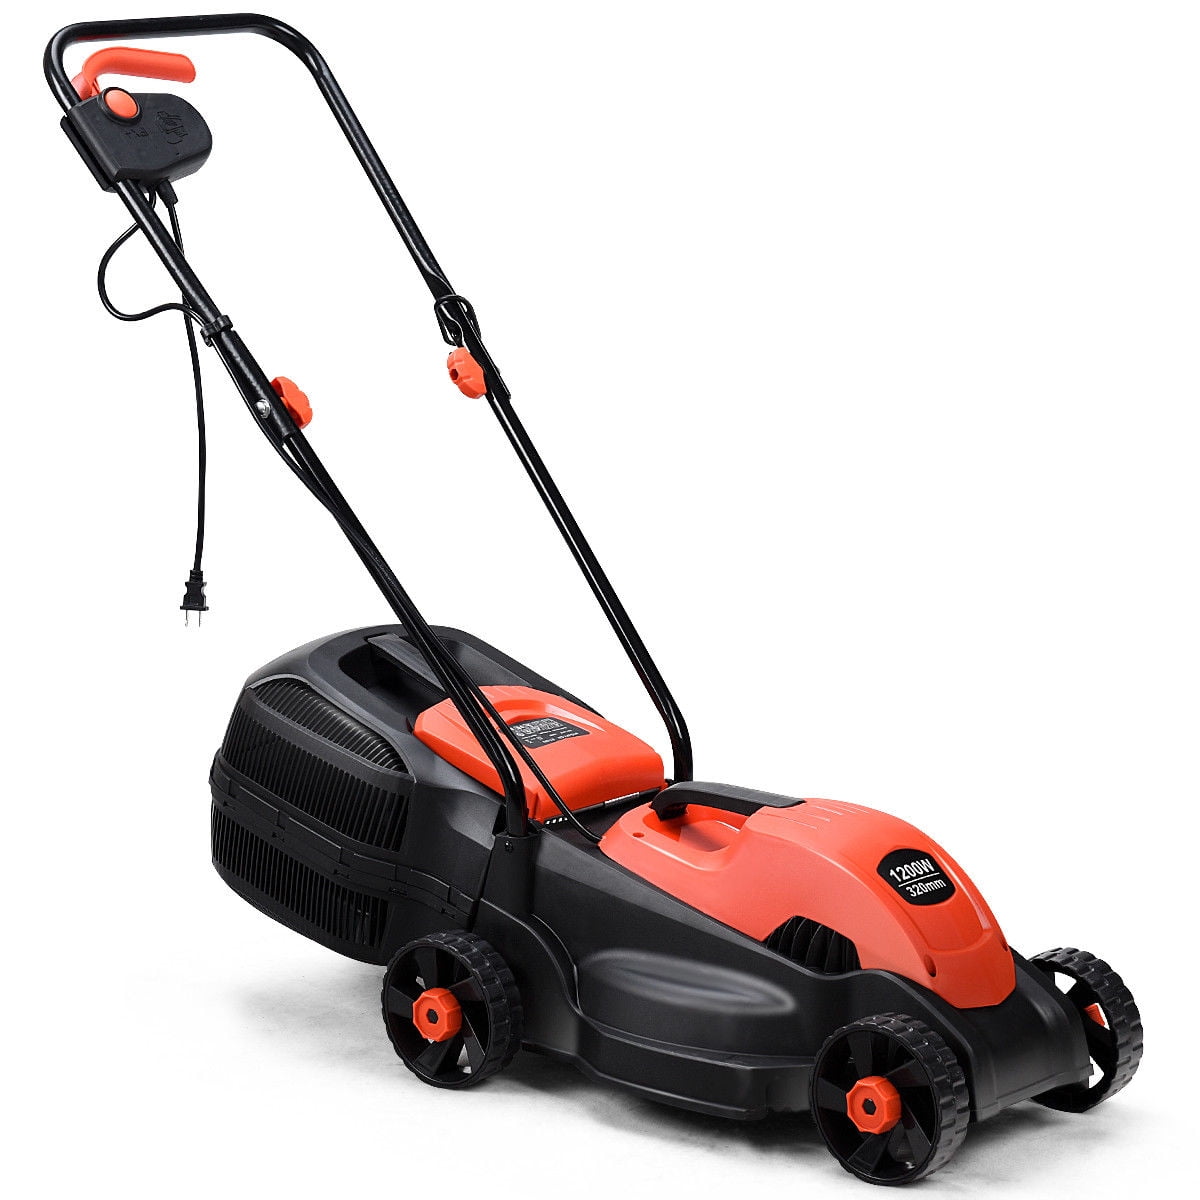 electric-riding-lawn-mower-with-bagger-at-ryobi-lawn-mower